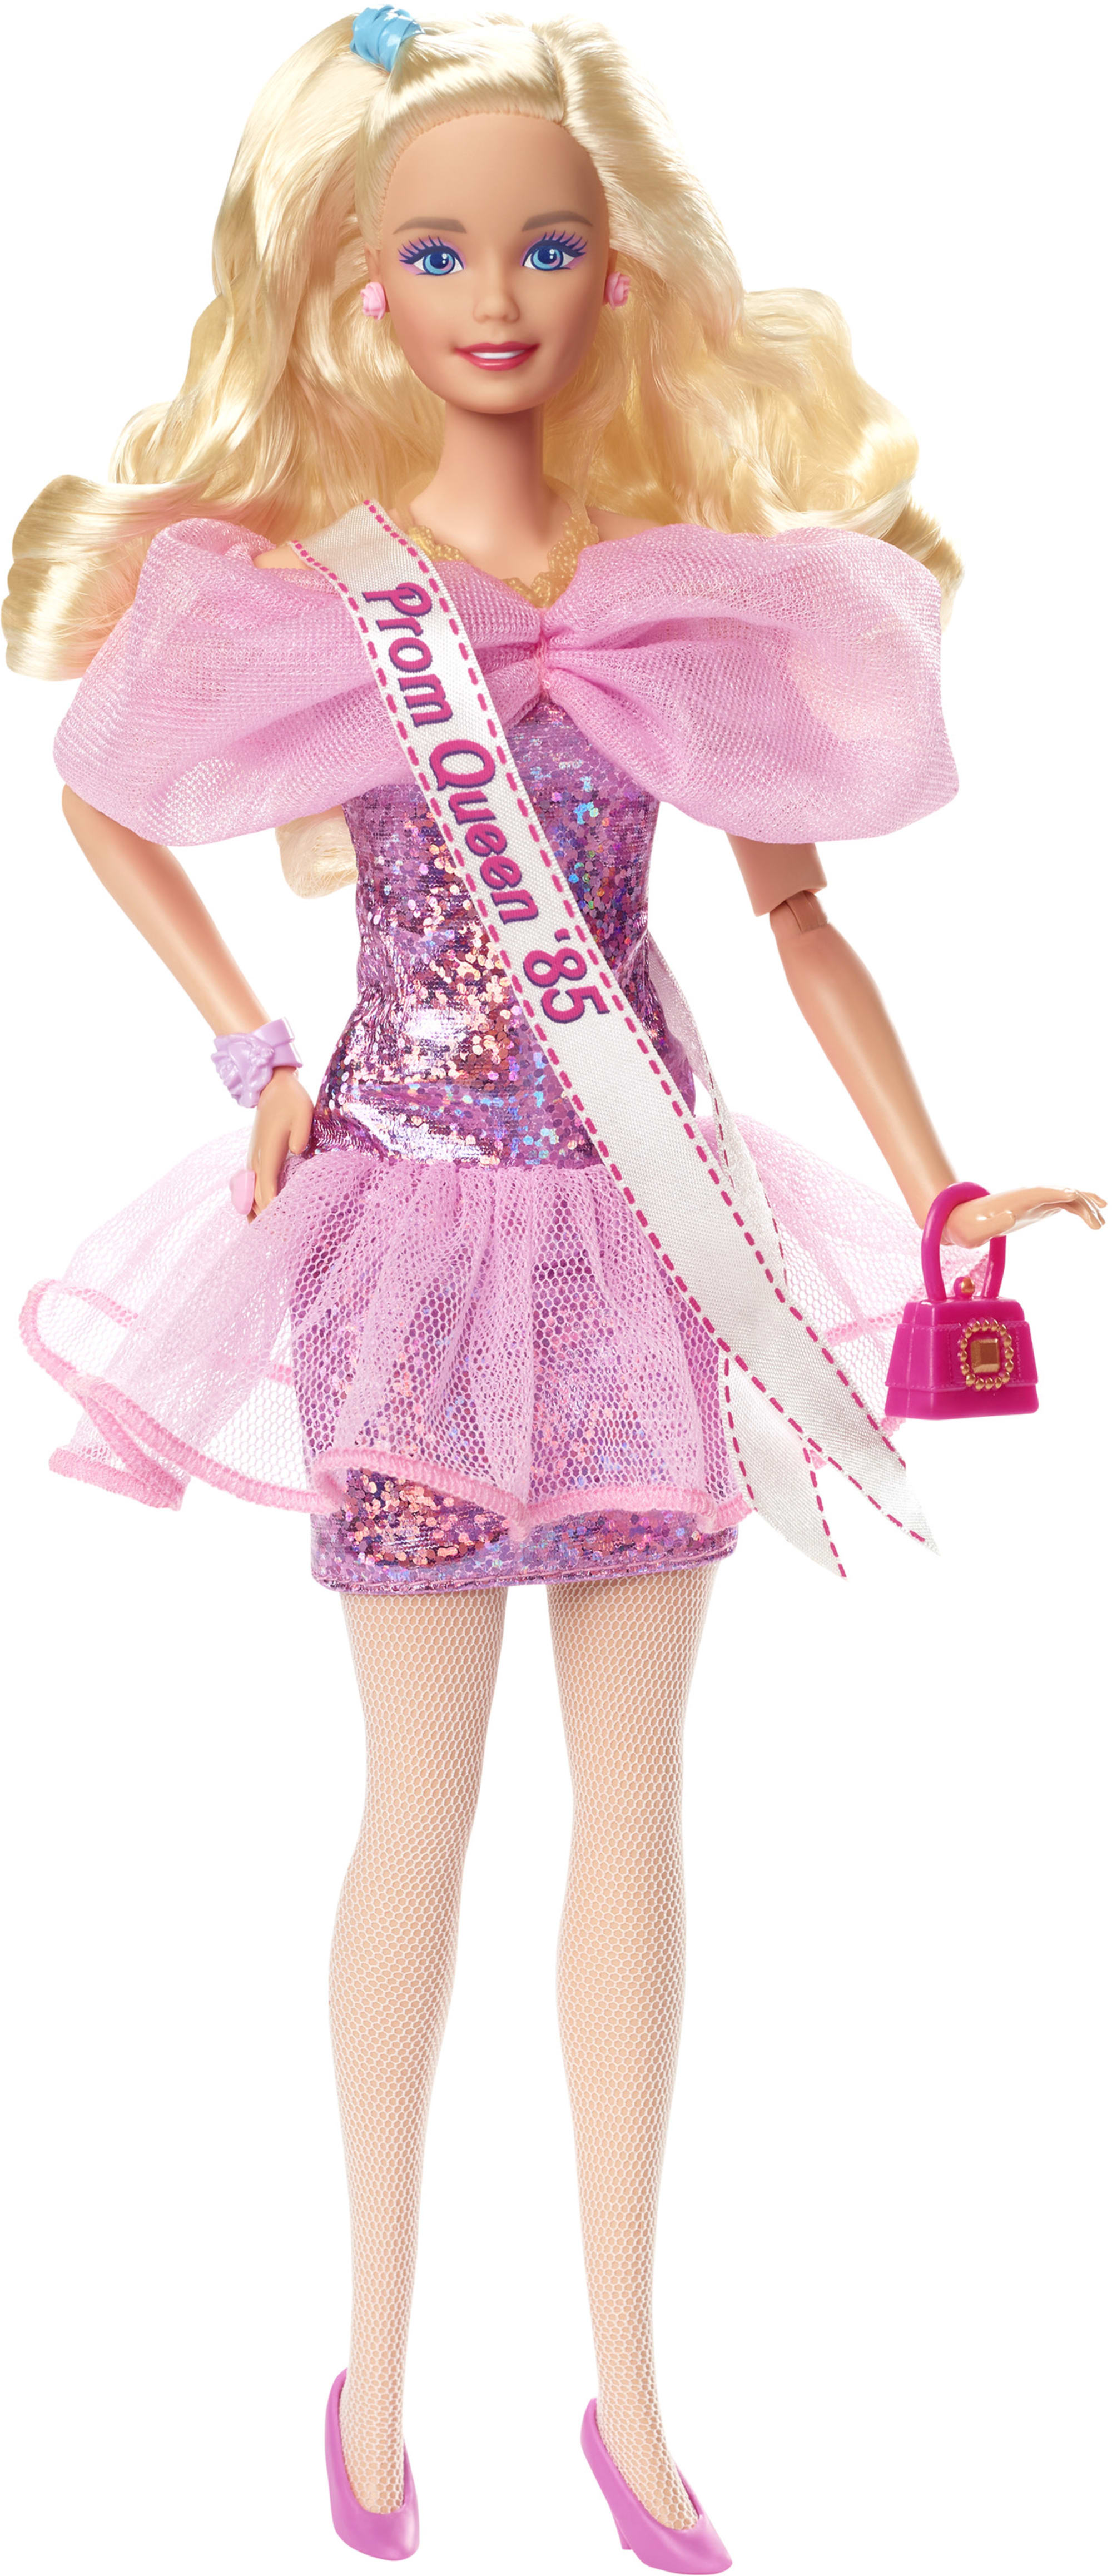 I had too much fun restyling my Barbie Looks girls in Barbie Extra